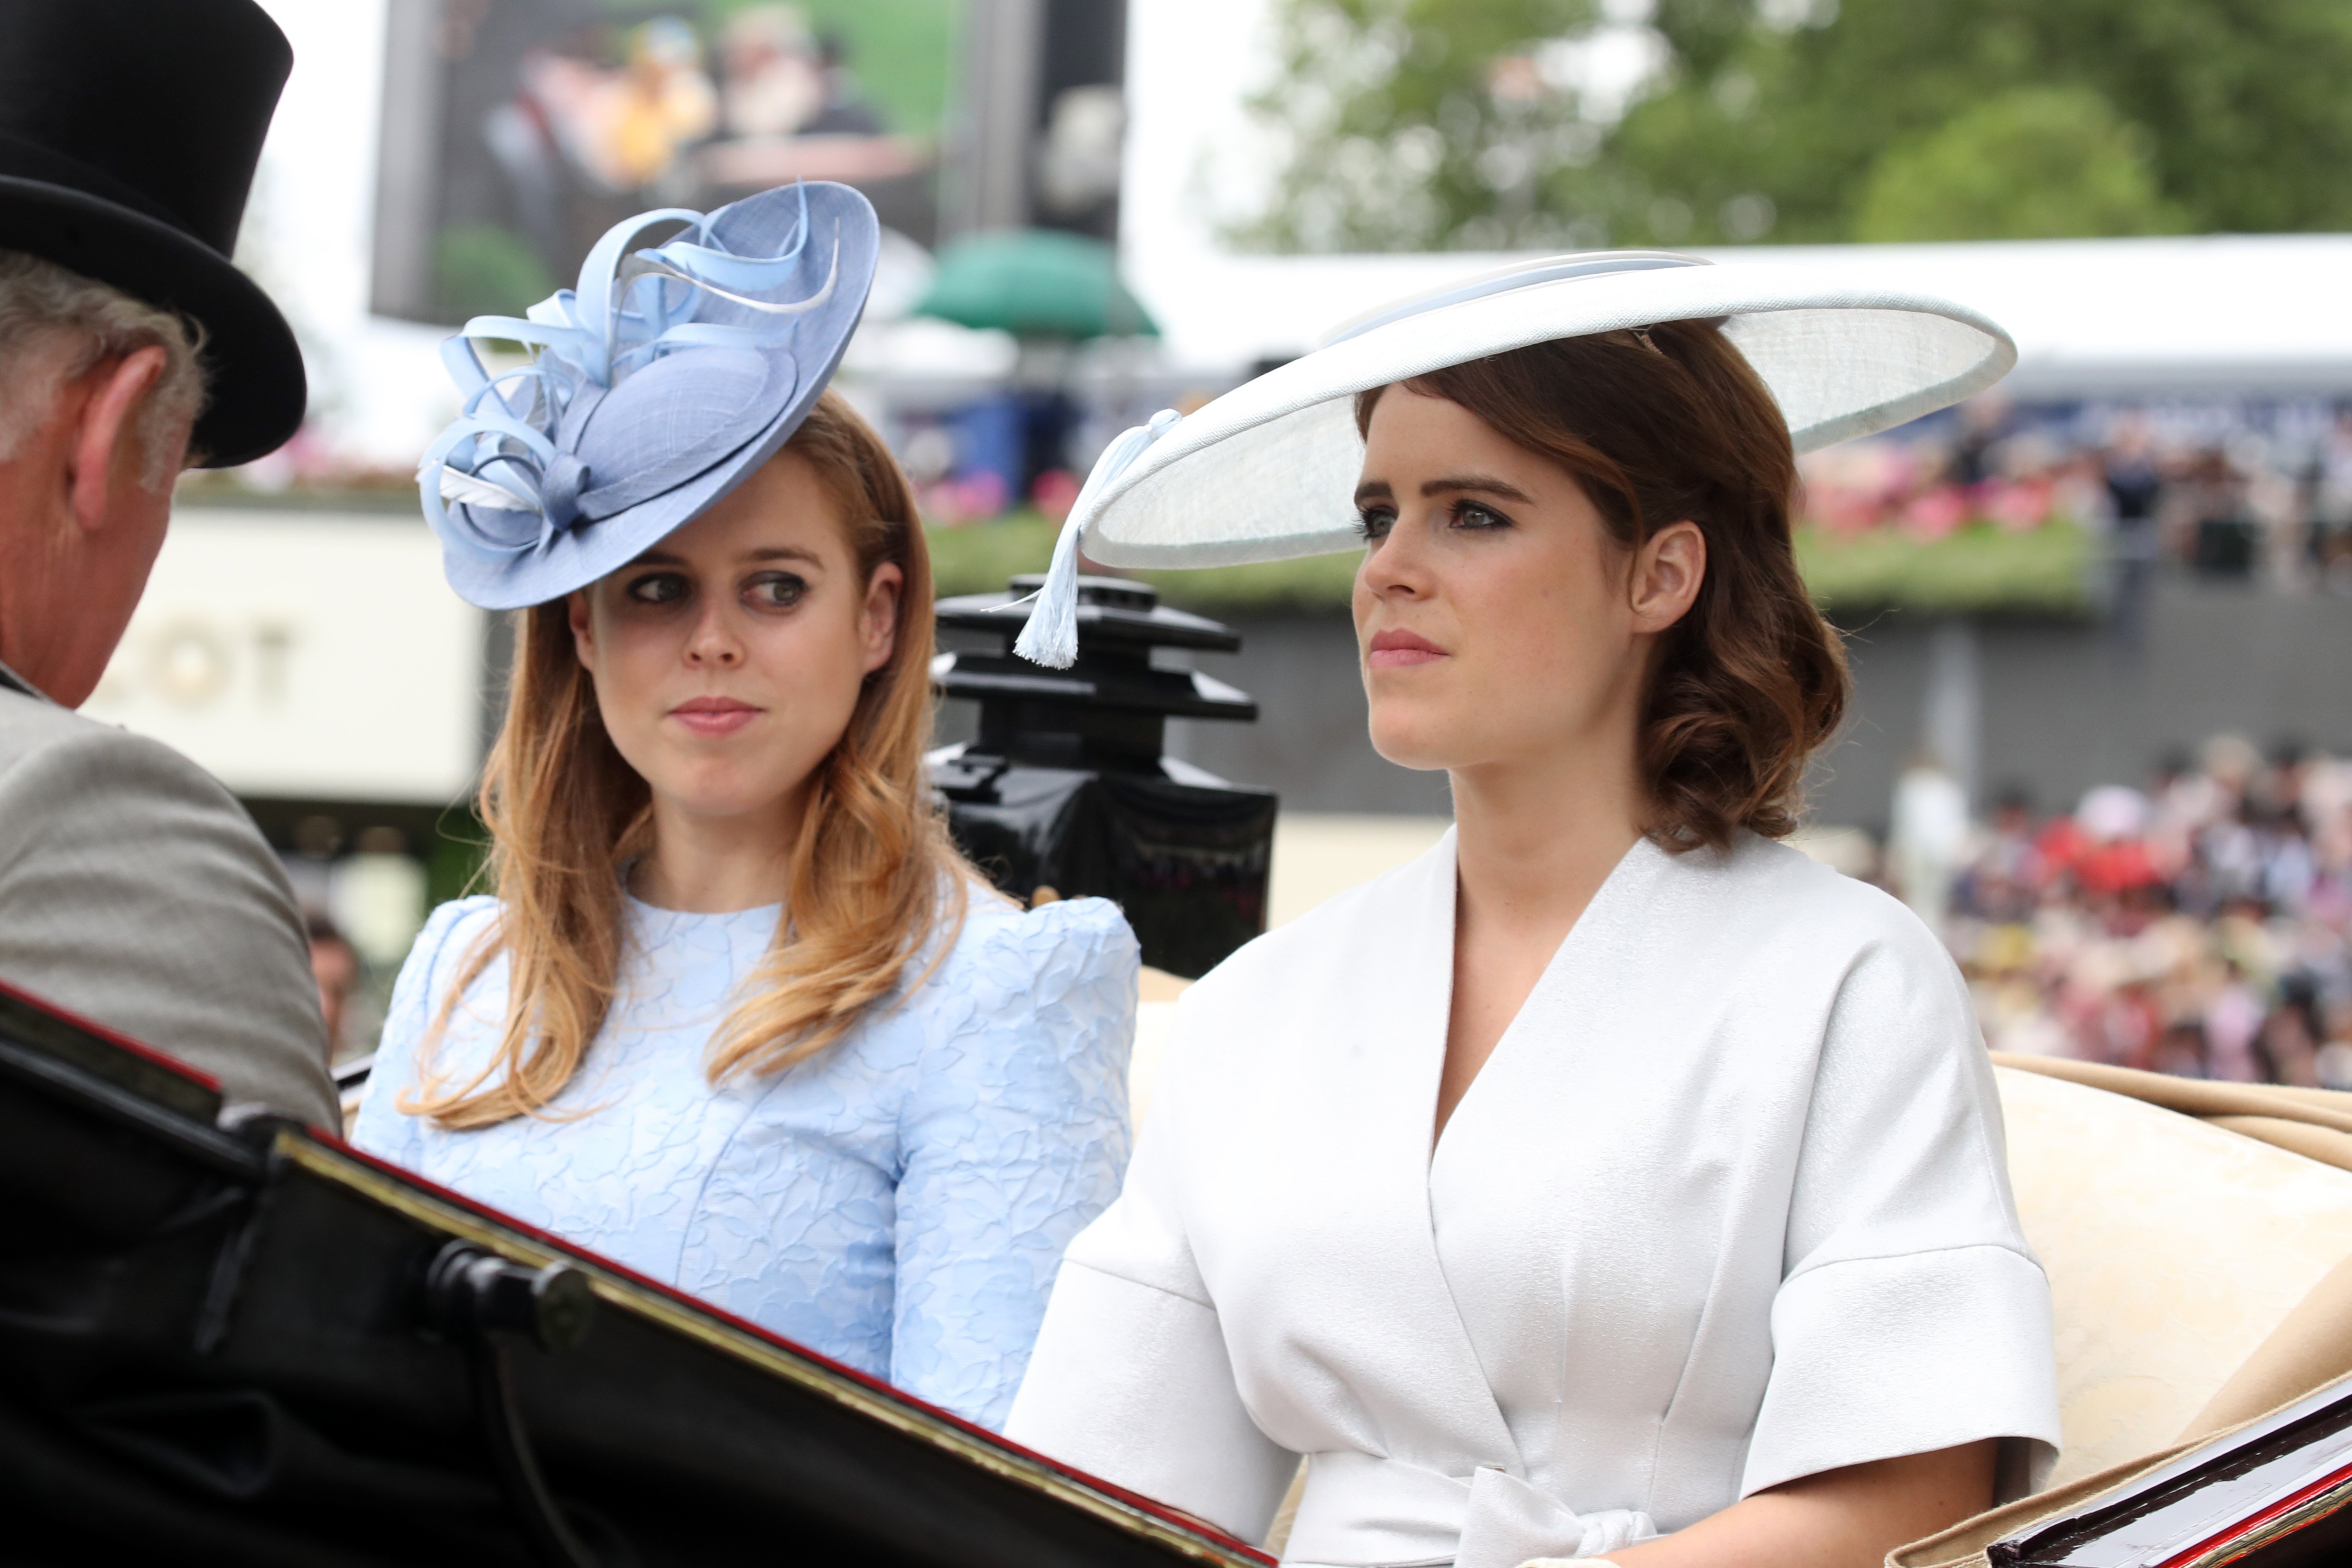 Princess Beatrice and Princess Eugenie. | Source: Getty Images